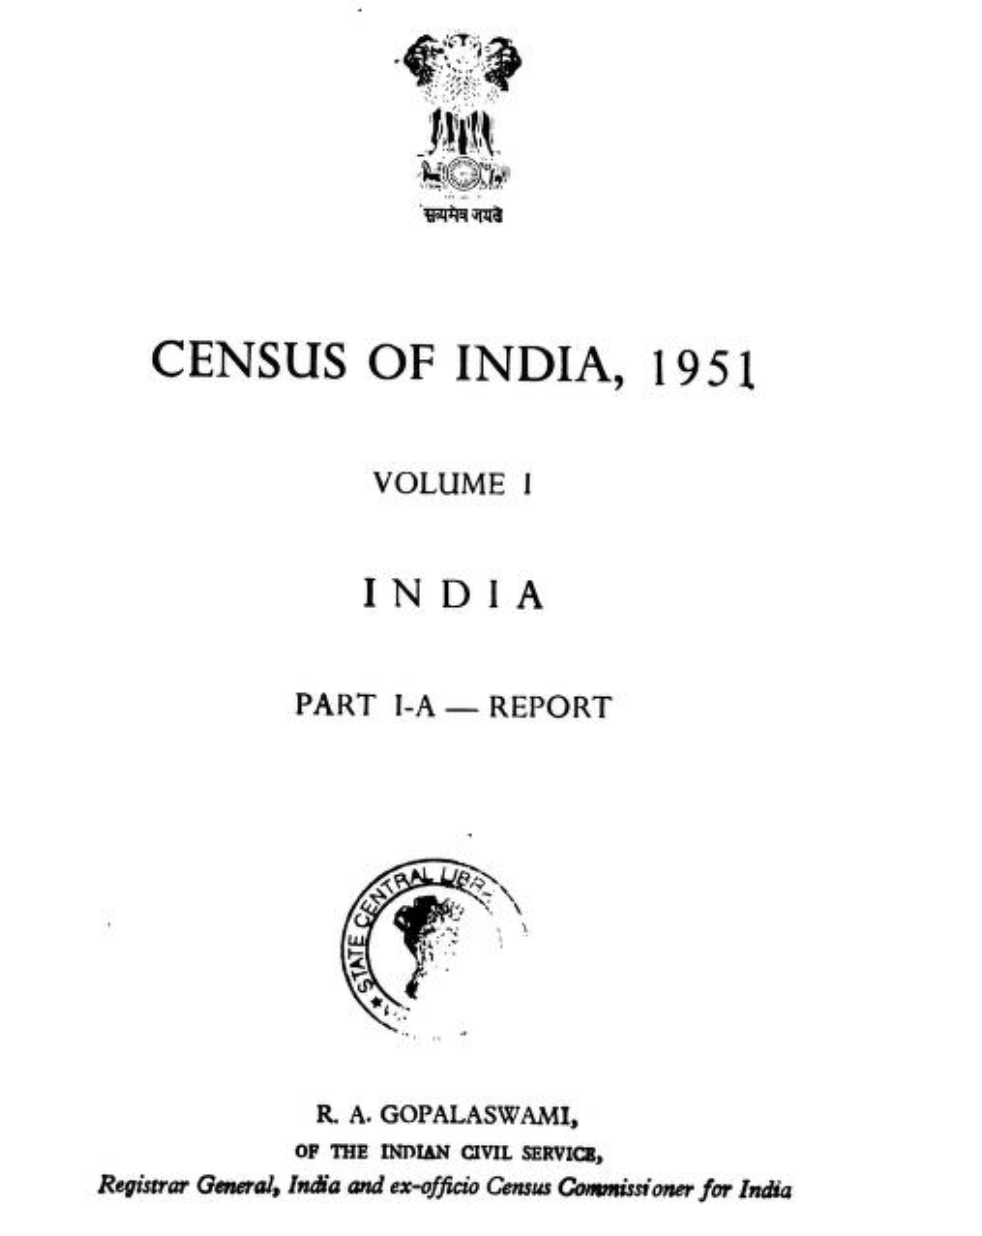 The first page of the Census Of India, 1951 Vol. 1 Part. 1-a; Source: Archive.org